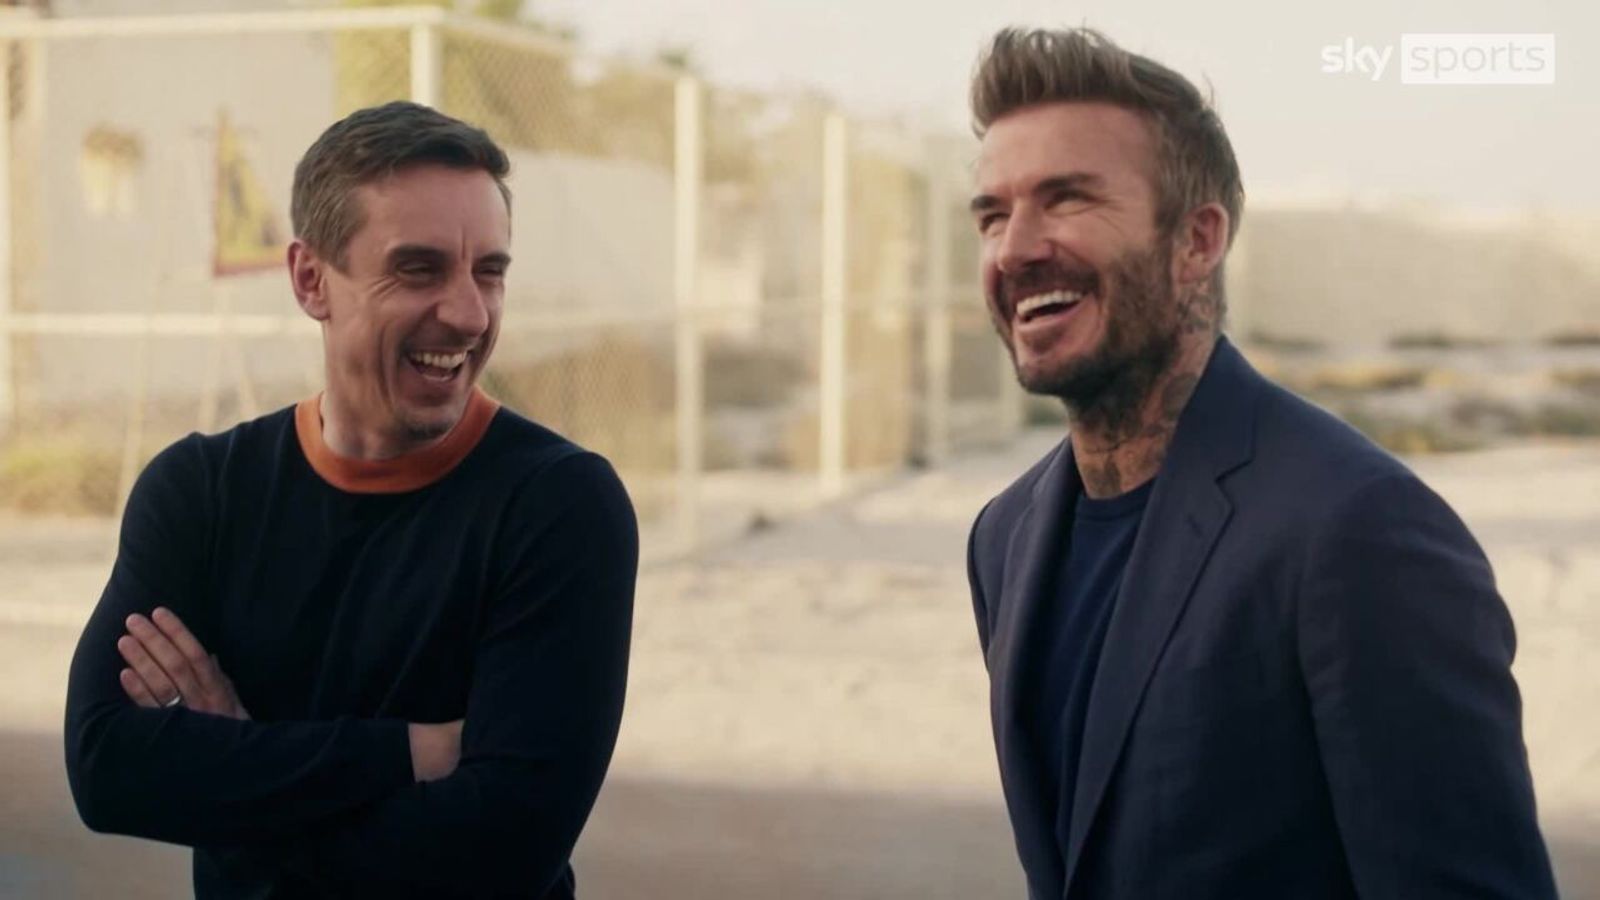 The Overlap: David Beckham believes 2022 Qatar World Cup being held in winter can benefit England